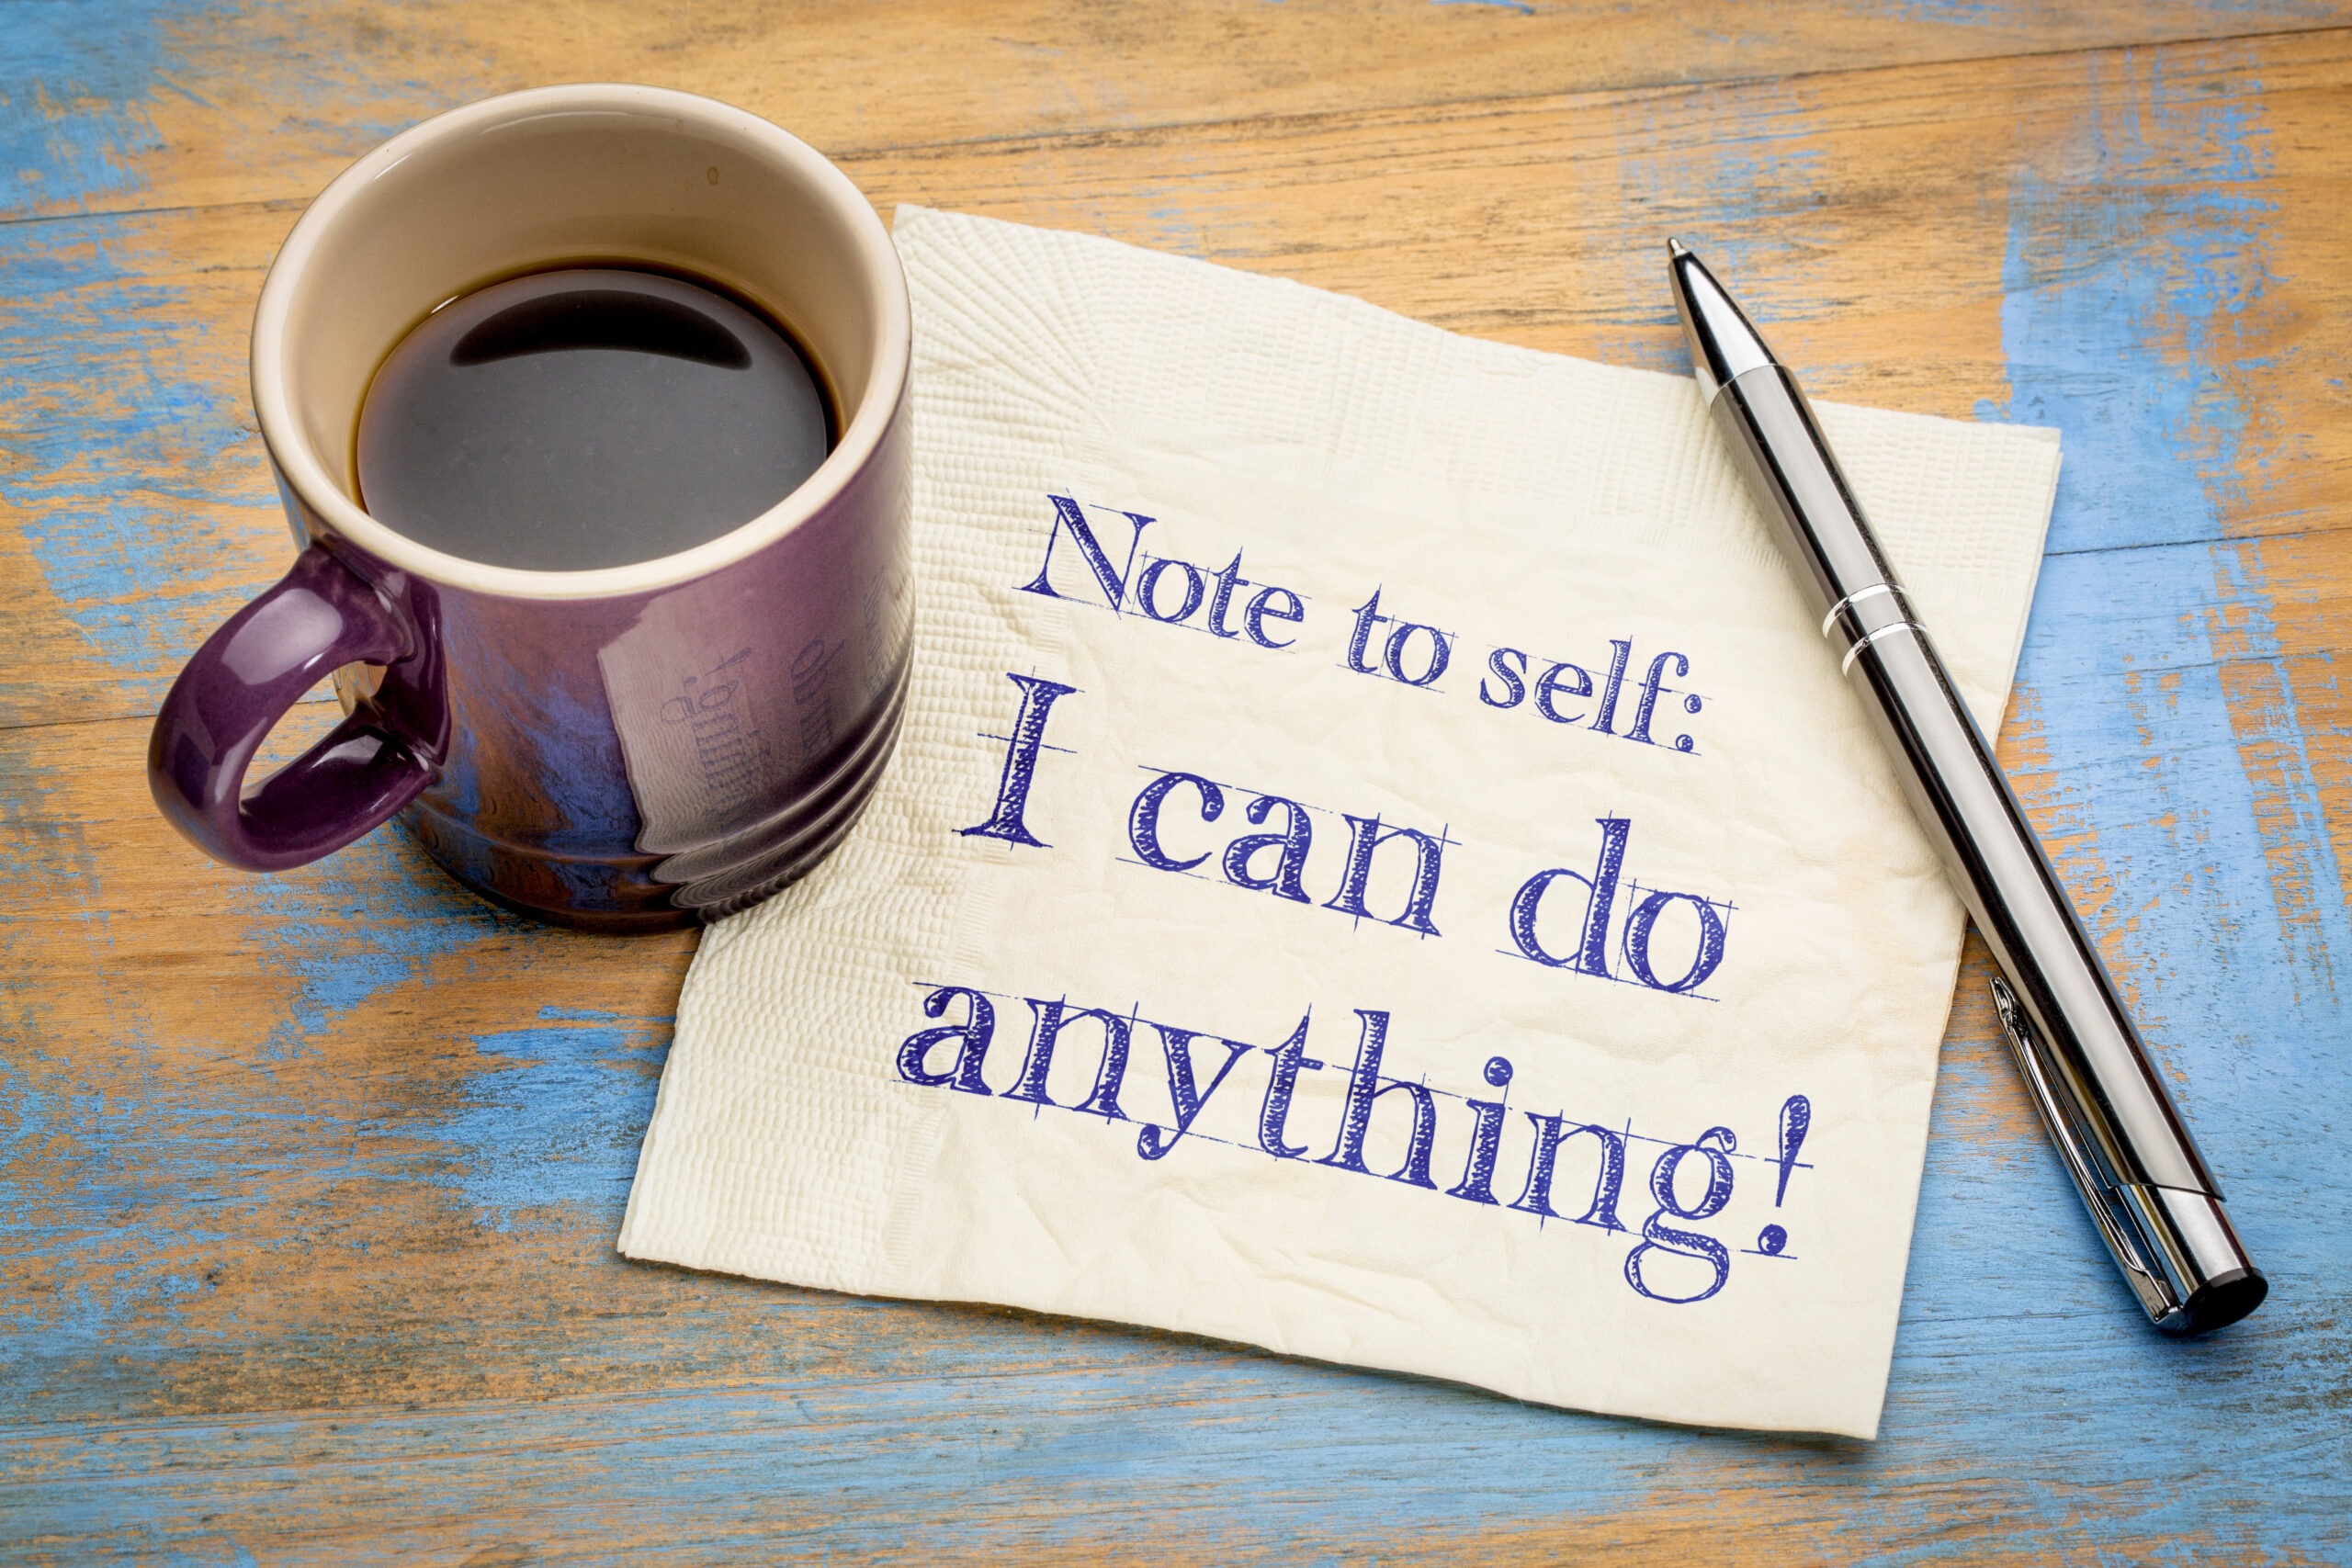 A napkin is held down by a cup of coffee and a pen. It reads "note to self: I can do anything!", serving as a reminder that you can figure out how to keep going even when it's hard.